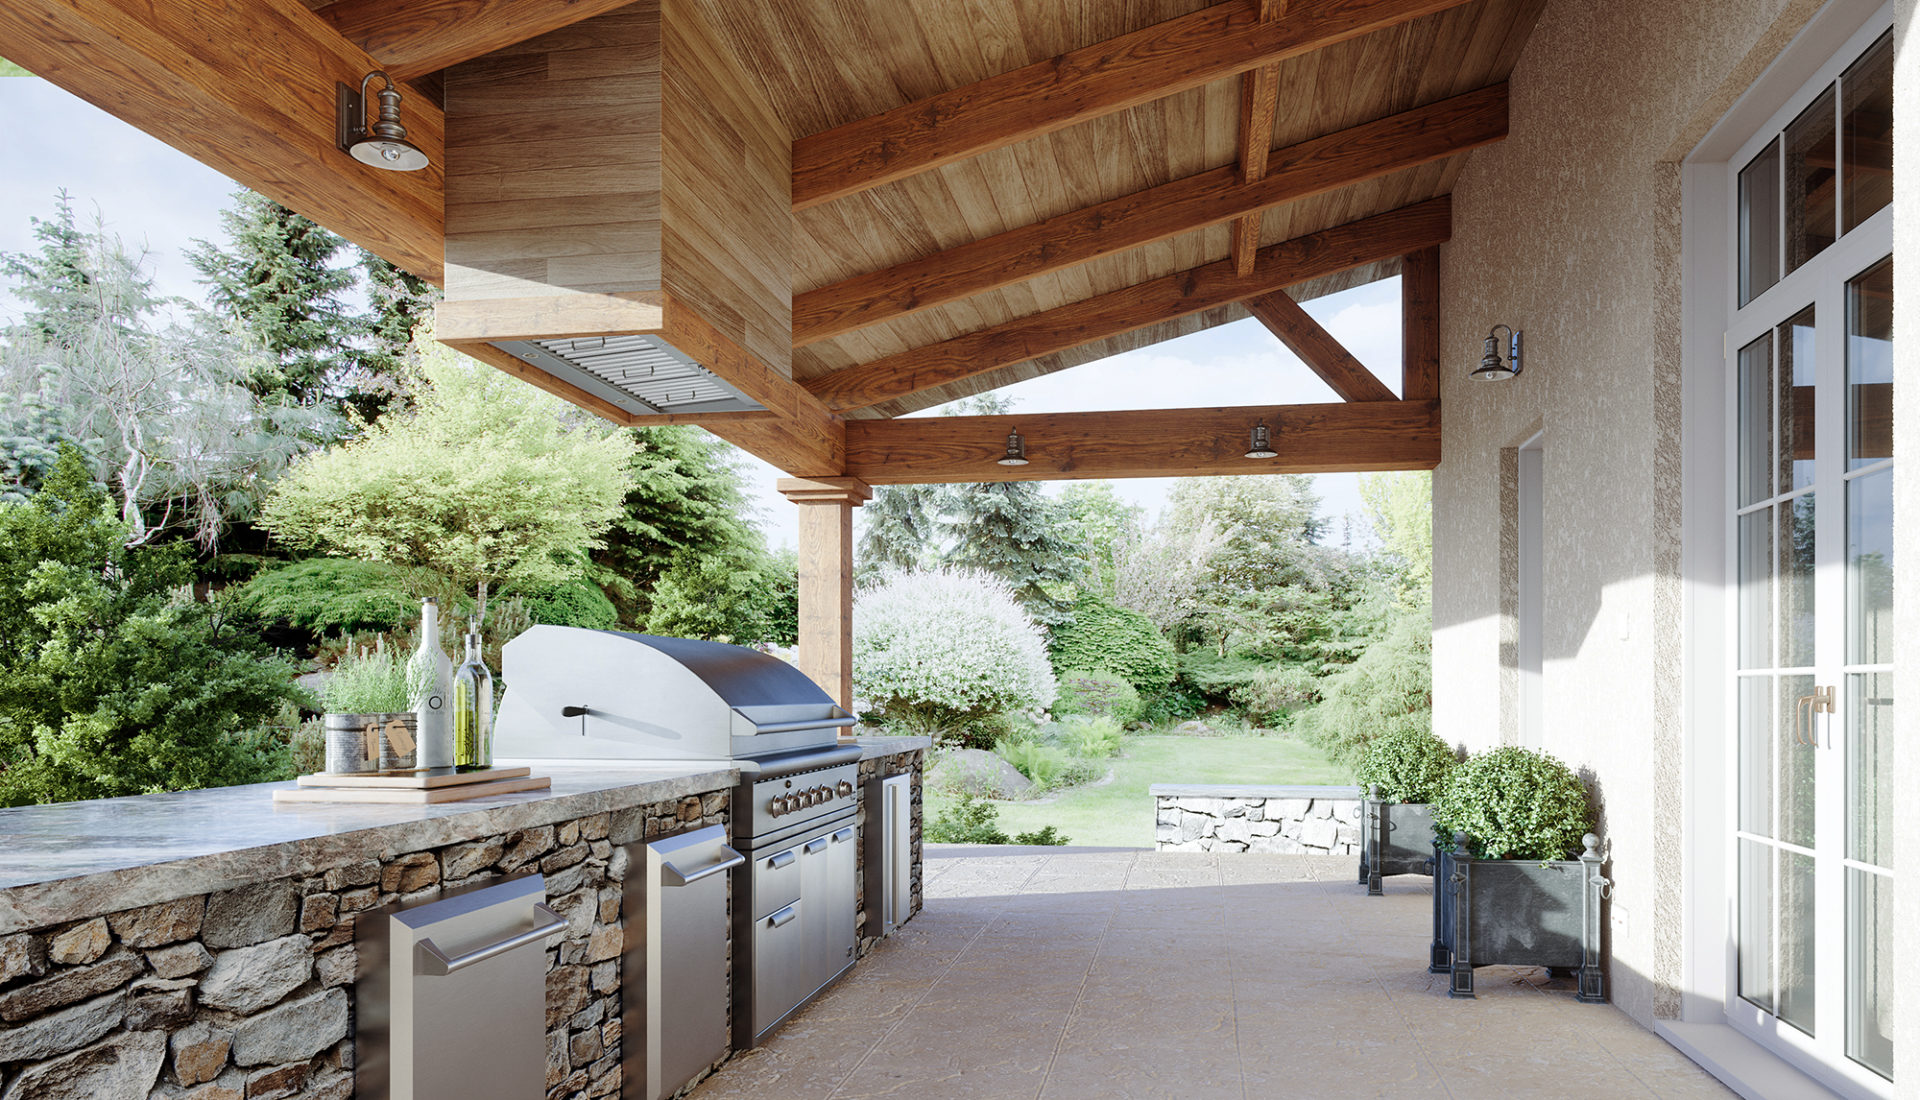 Blurring the lines between the indoors and outdoors | Zephyr Ventilation